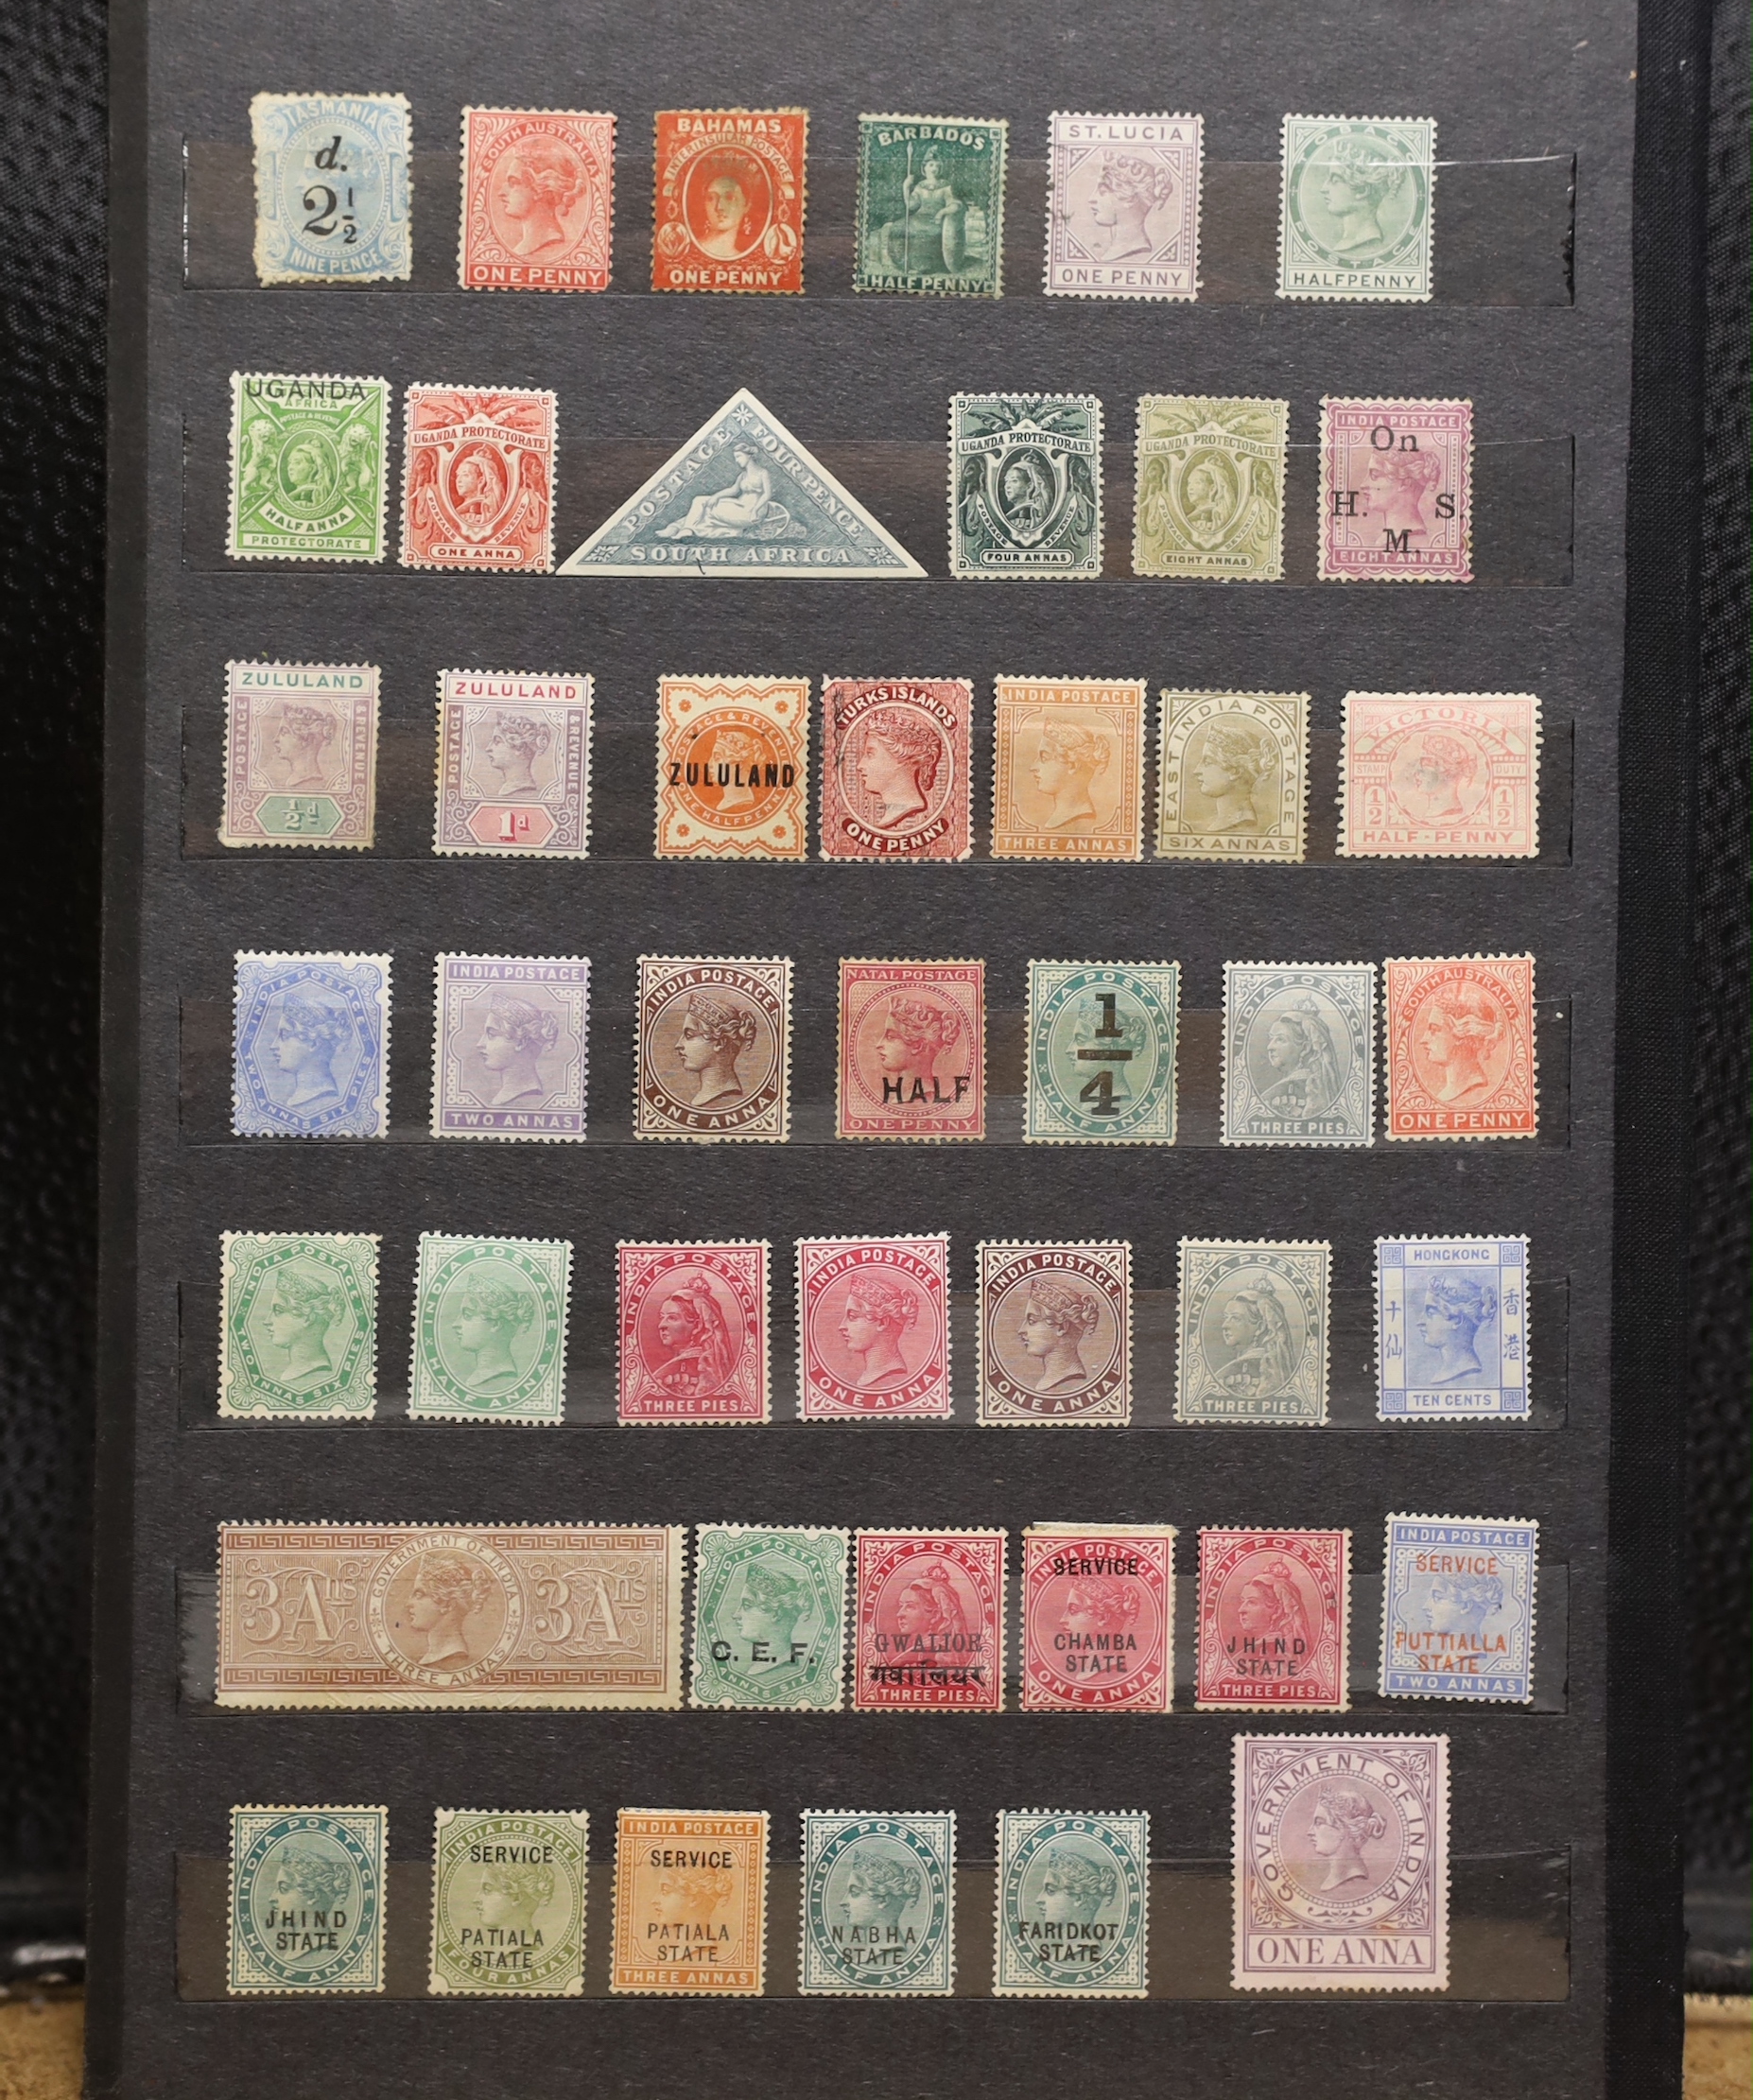 One hundred and nintey mint-mounted Victorian stamps